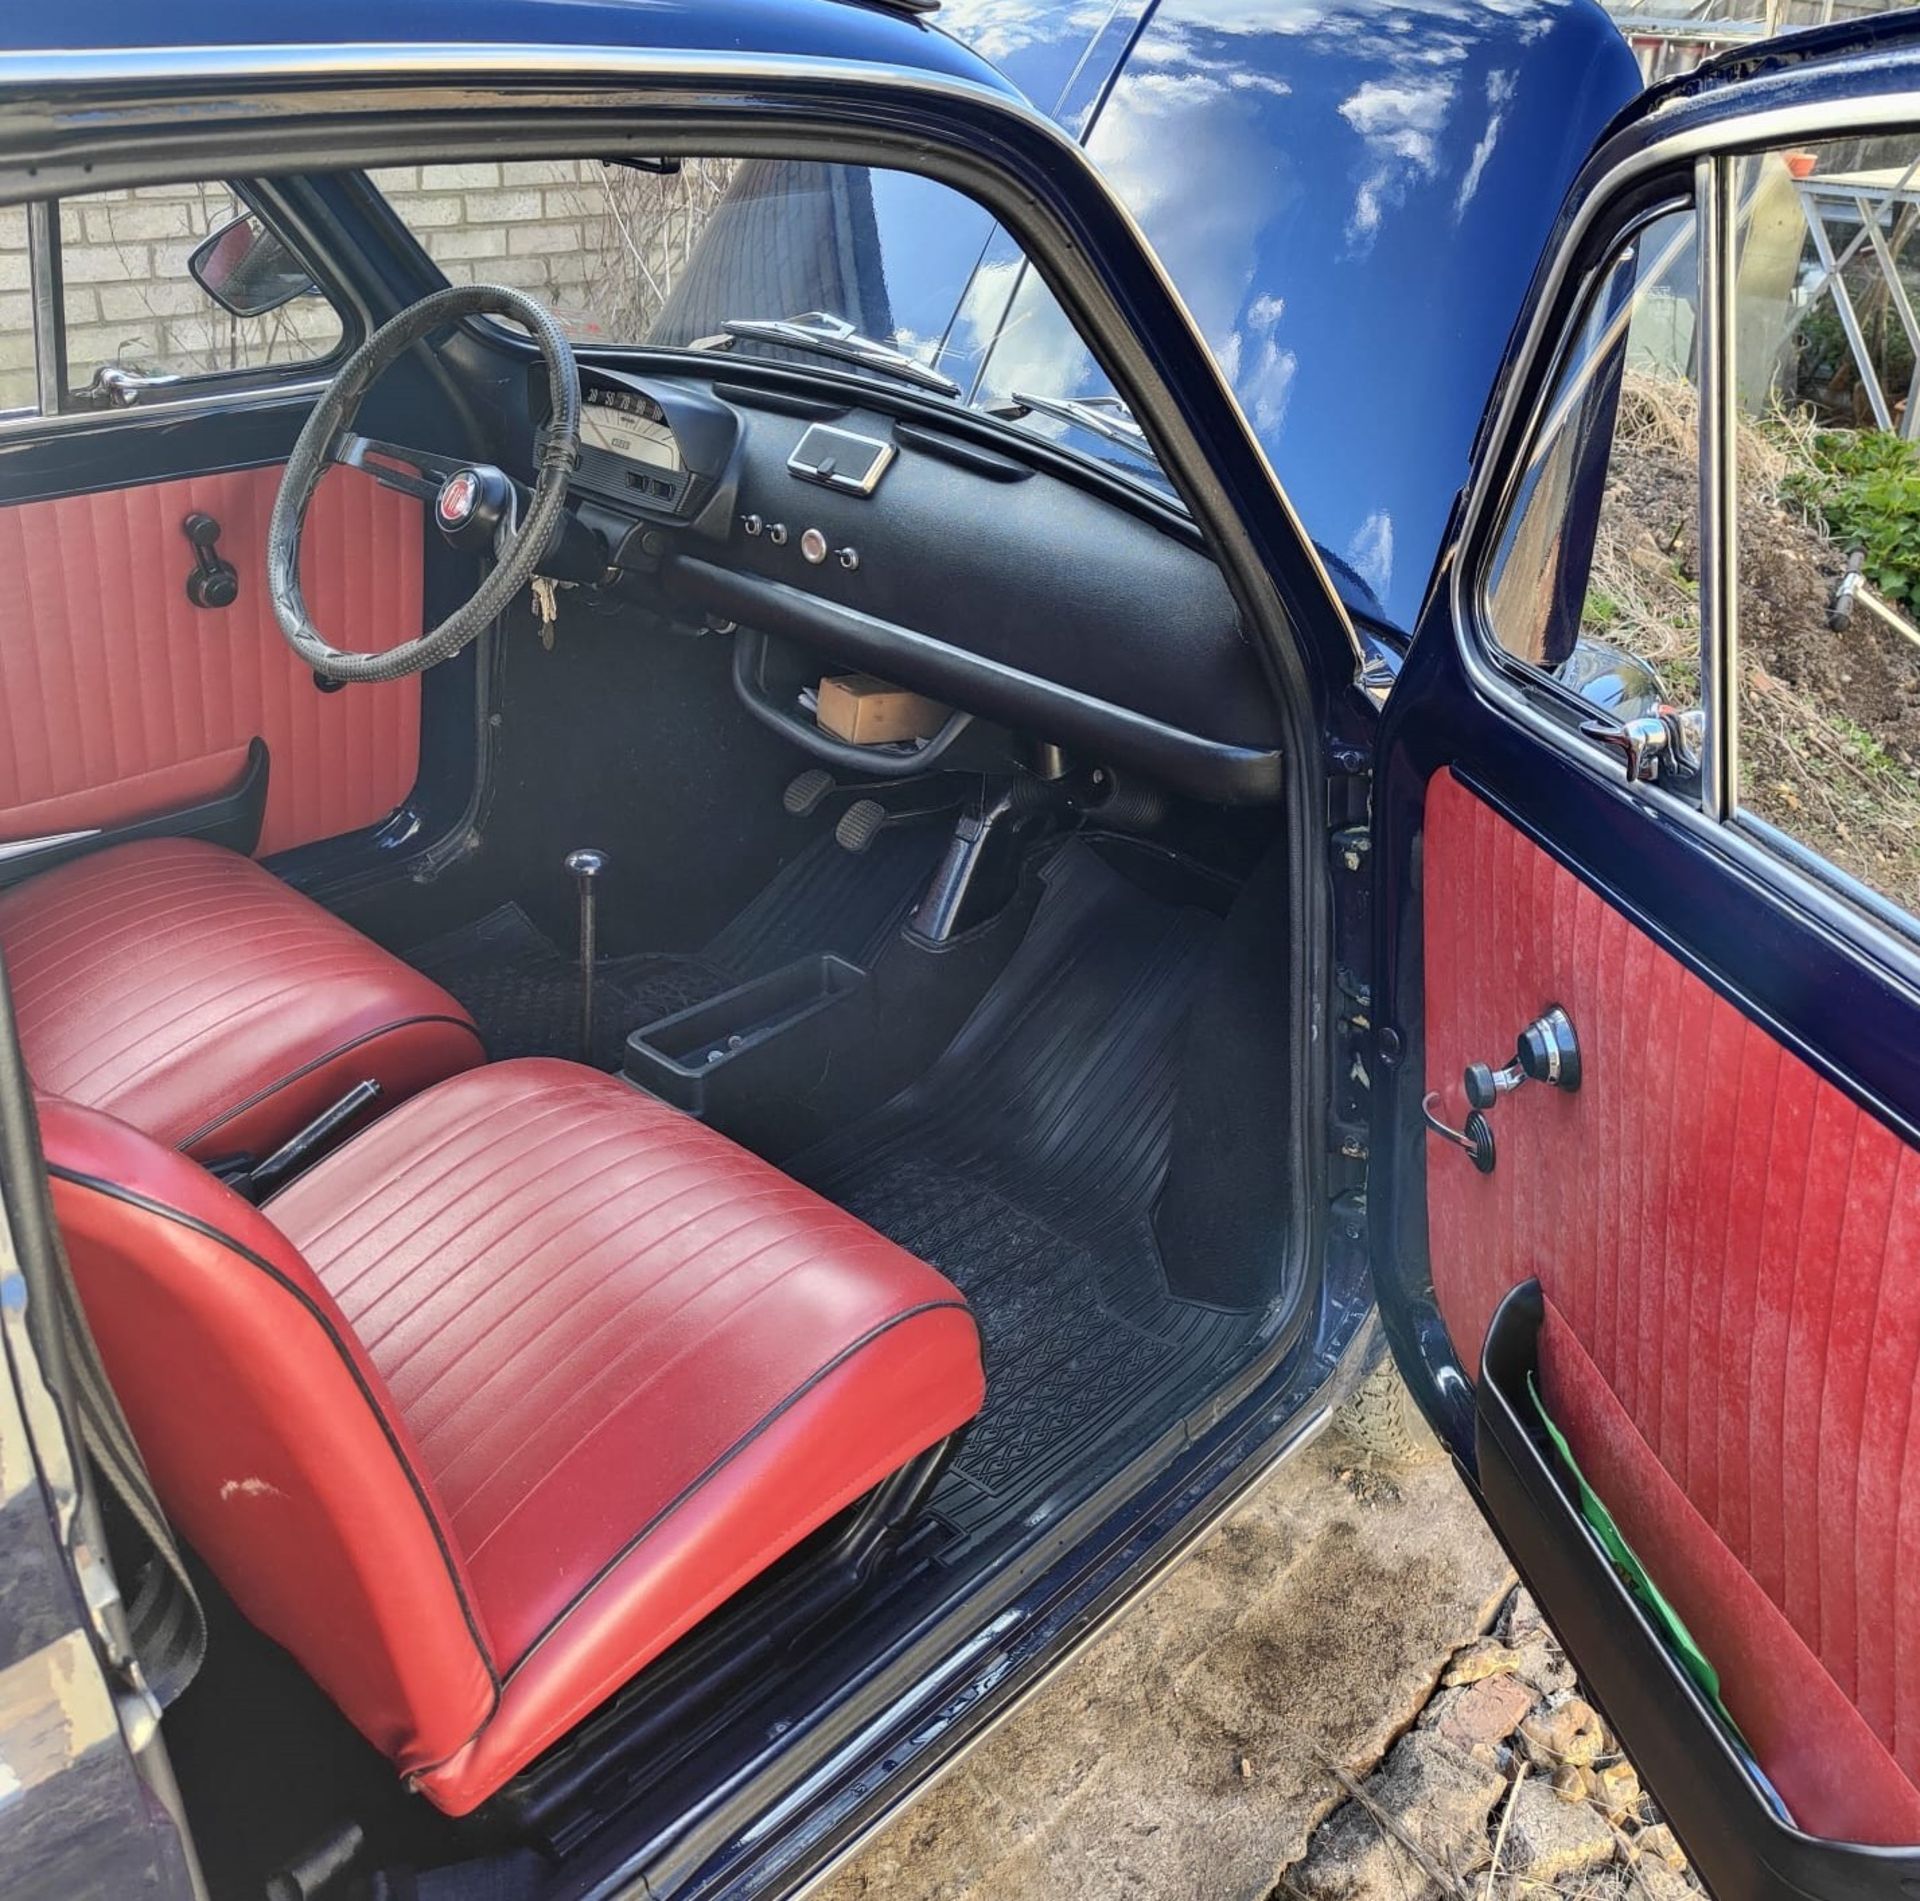 1971 FIAT 500L SALOON Registration Number: JBY 492J Chassis Number: TBA Recorded Mileage: 40,300 - Image 12 of 13